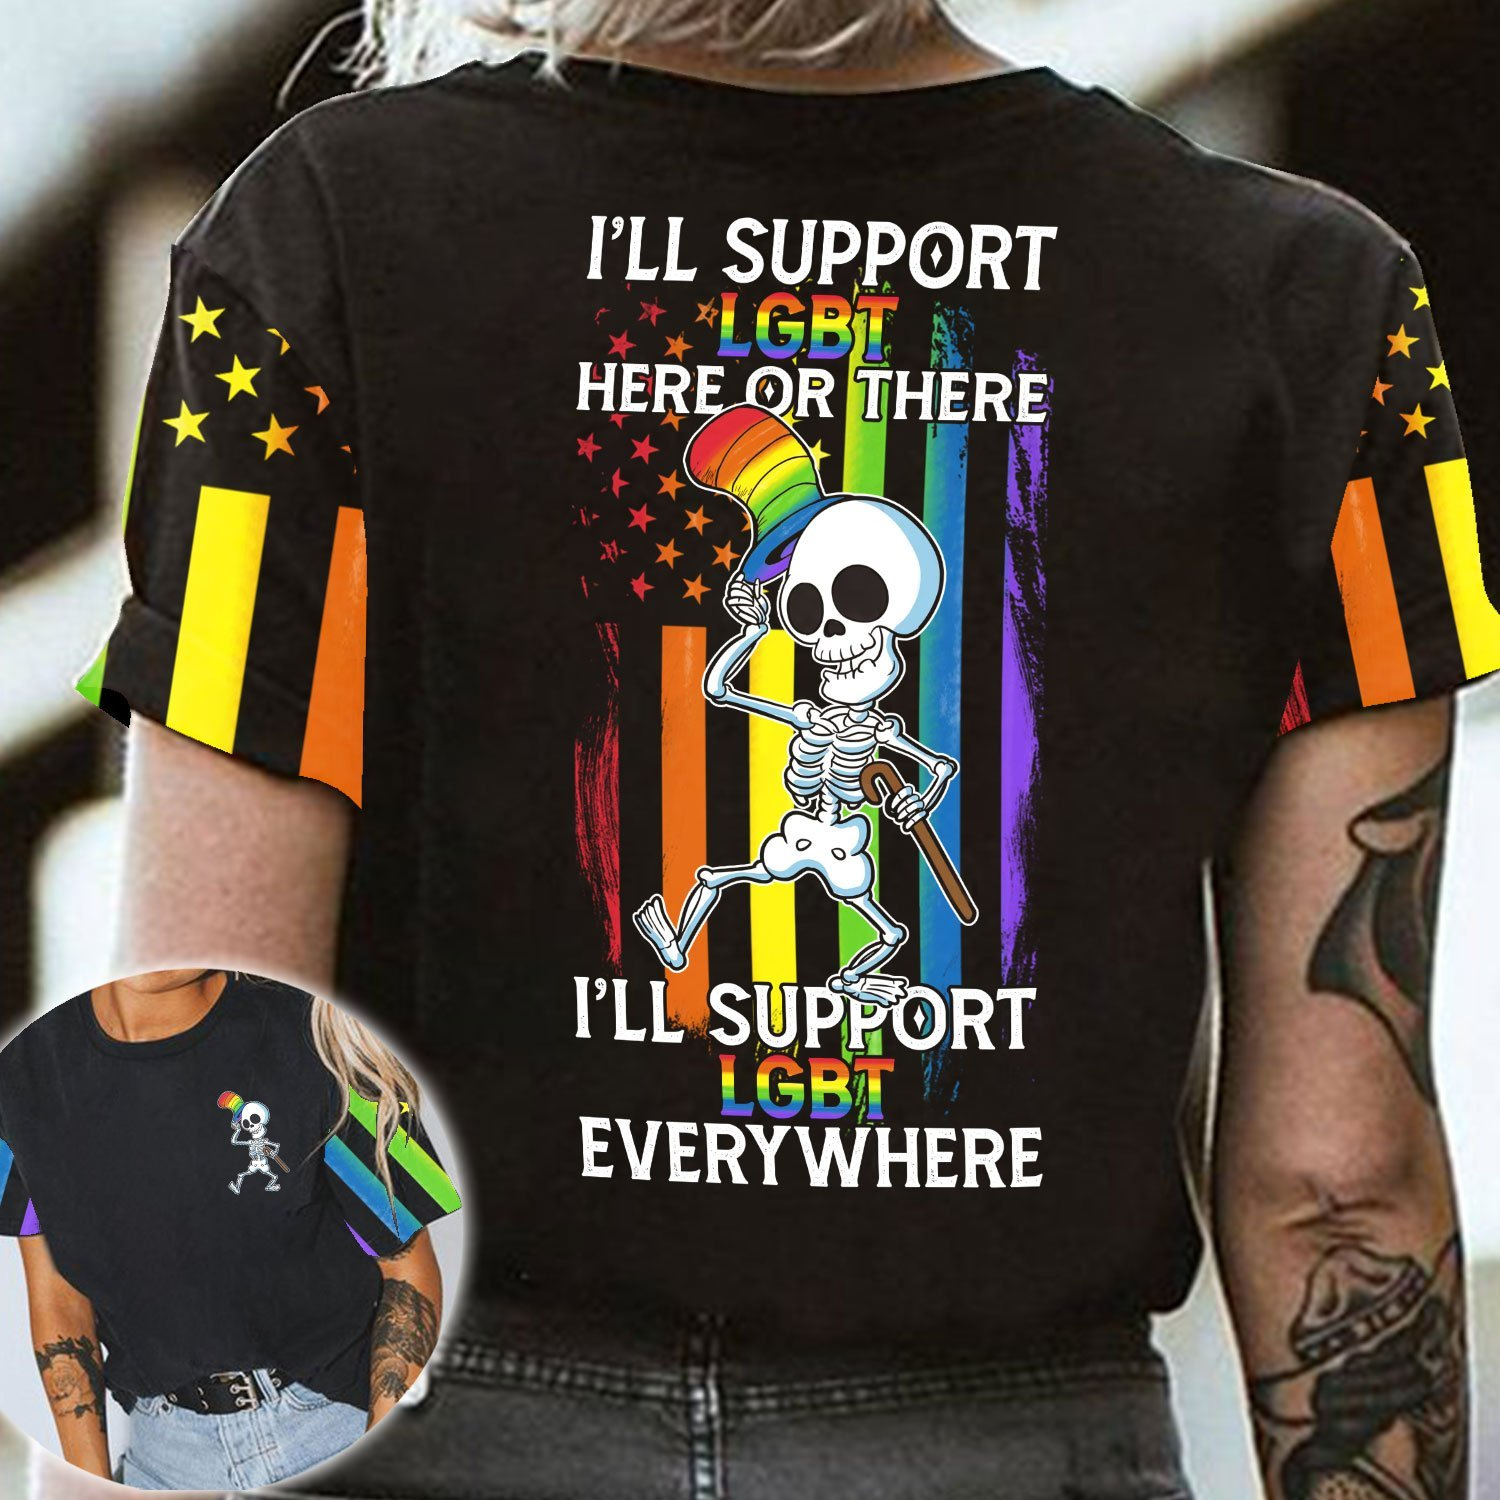 LGBTQ Shirt I’ll Support LGBT Everywhere/ Shirts For LGBT Pride Month/ Gift For LGBT Friends